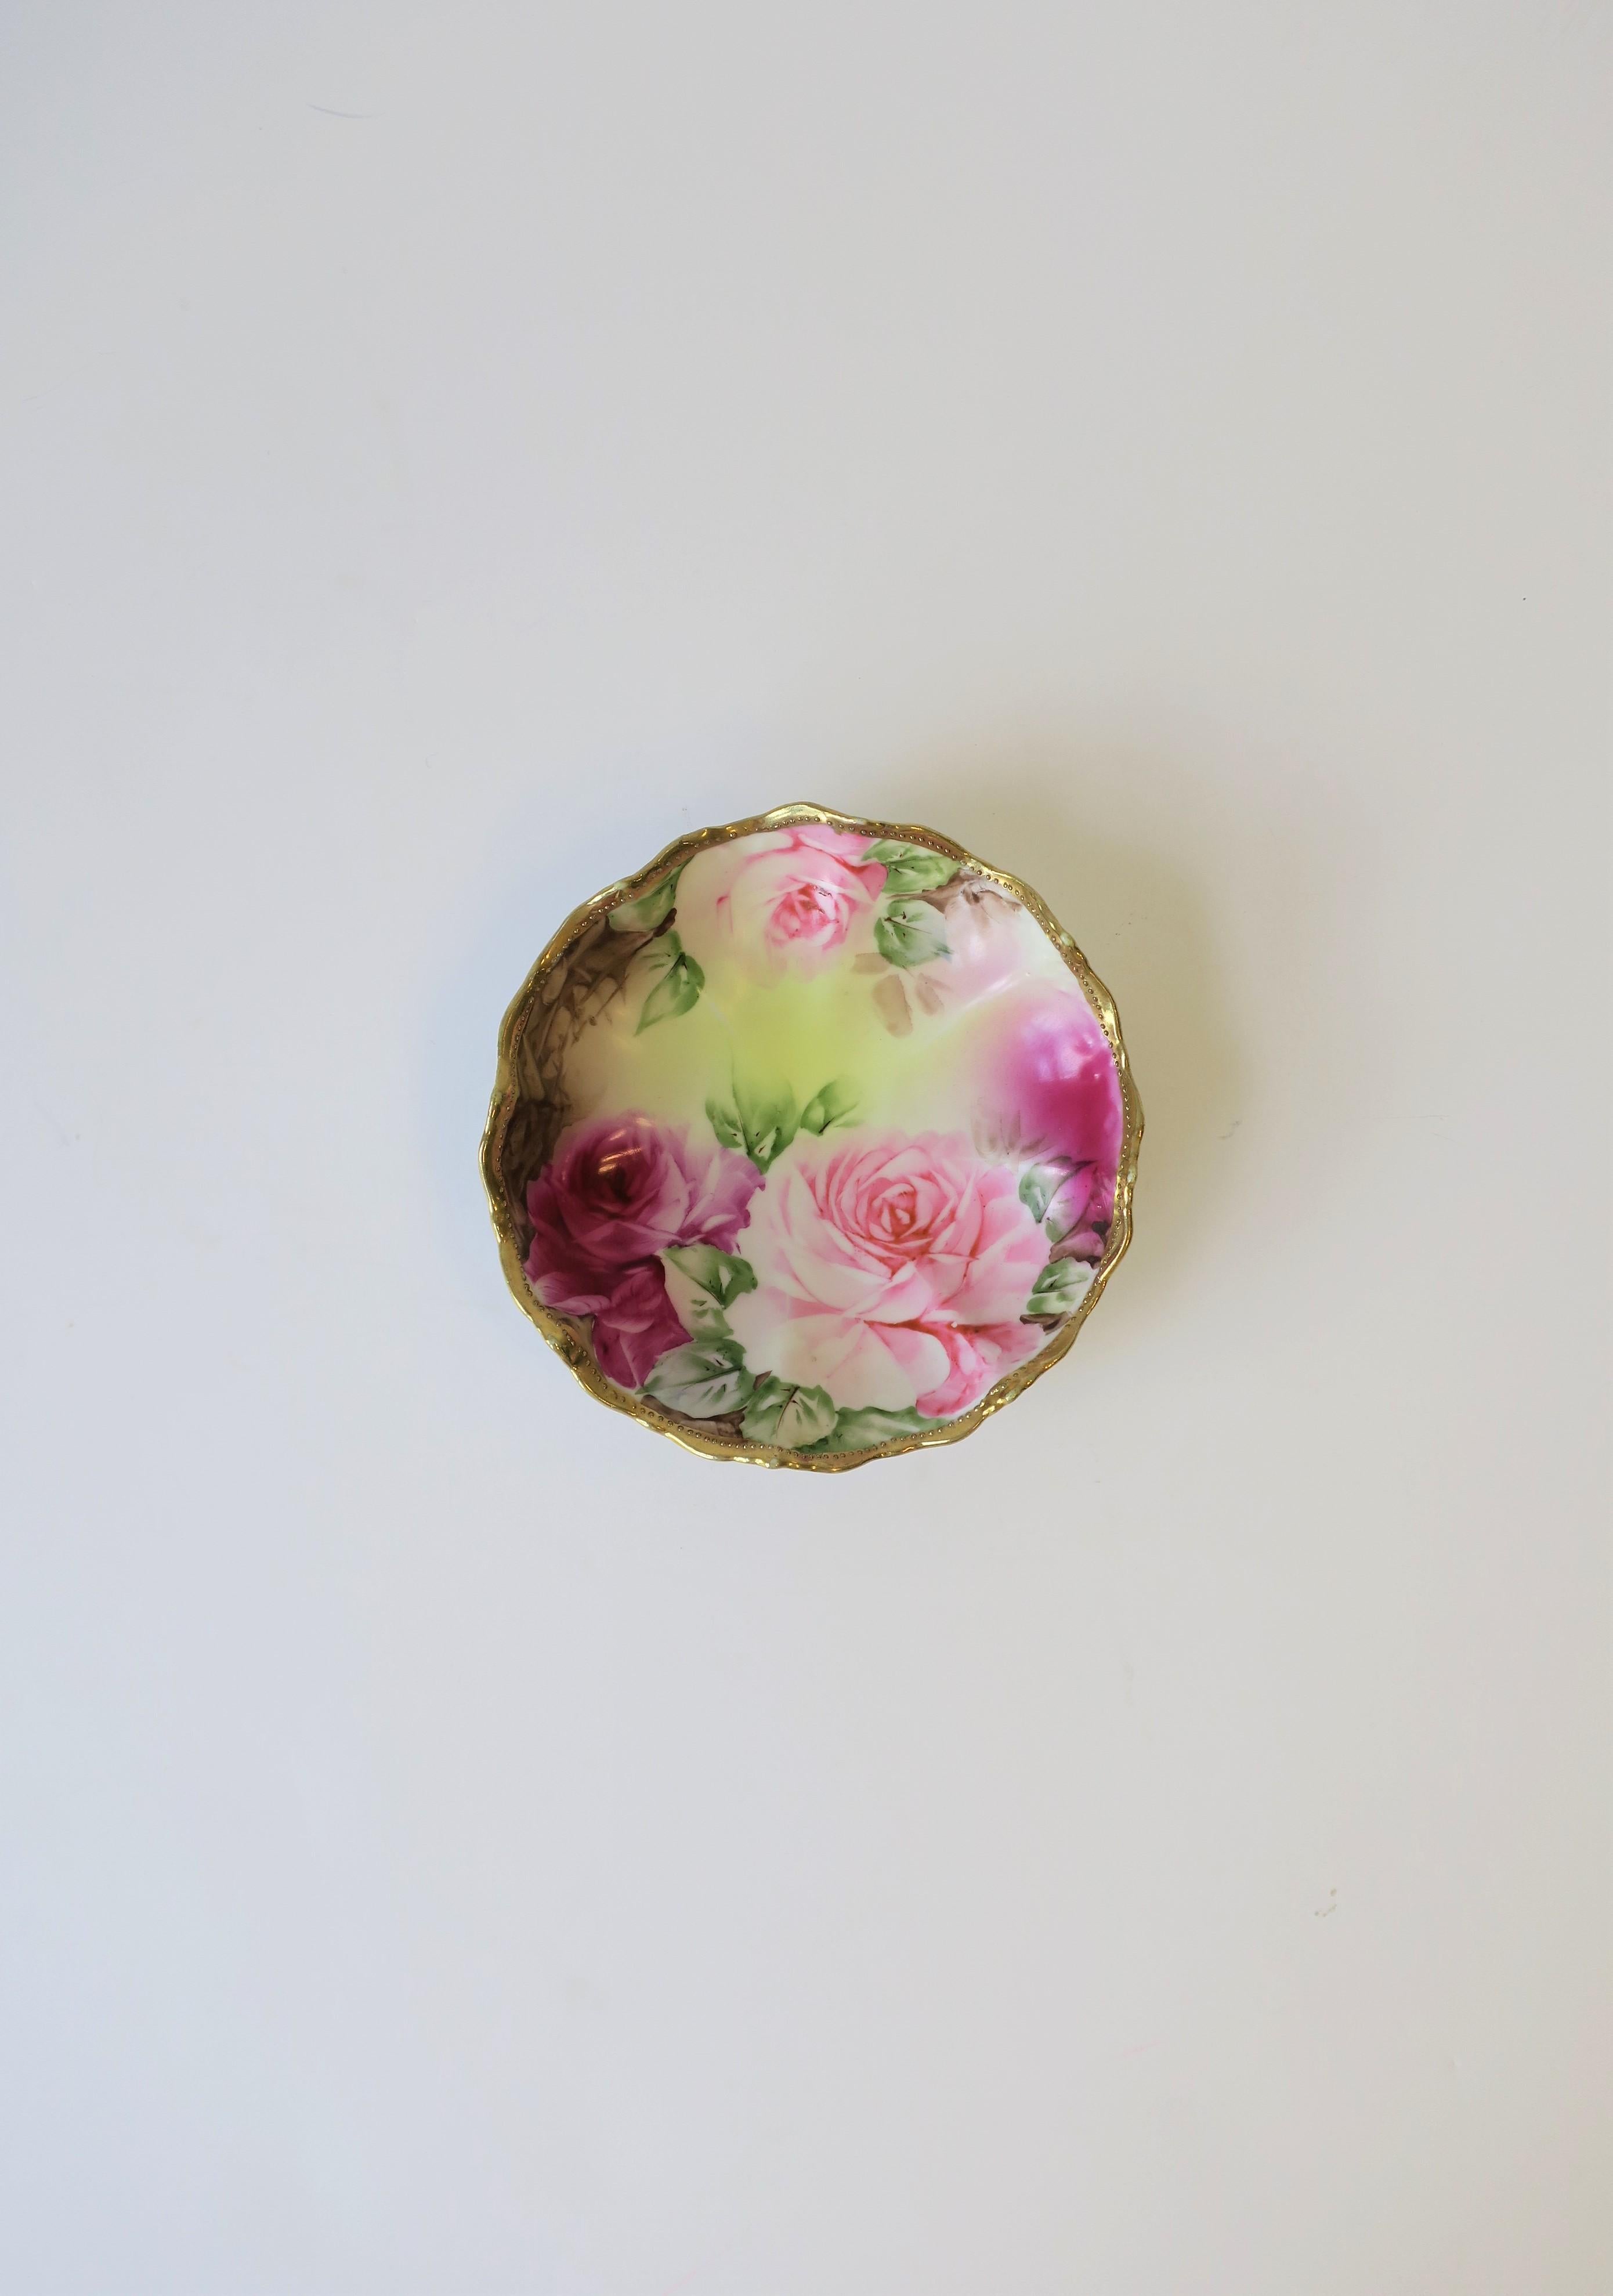 A very beautiful German porcelain ceramic jewelry dish, circa mid-20th century, Germany. This is a small dish with beautiful hand-decorated gold gilt detail around edge, and pink and fuchsia red roses with green leaves. Markers mark on bottom, but